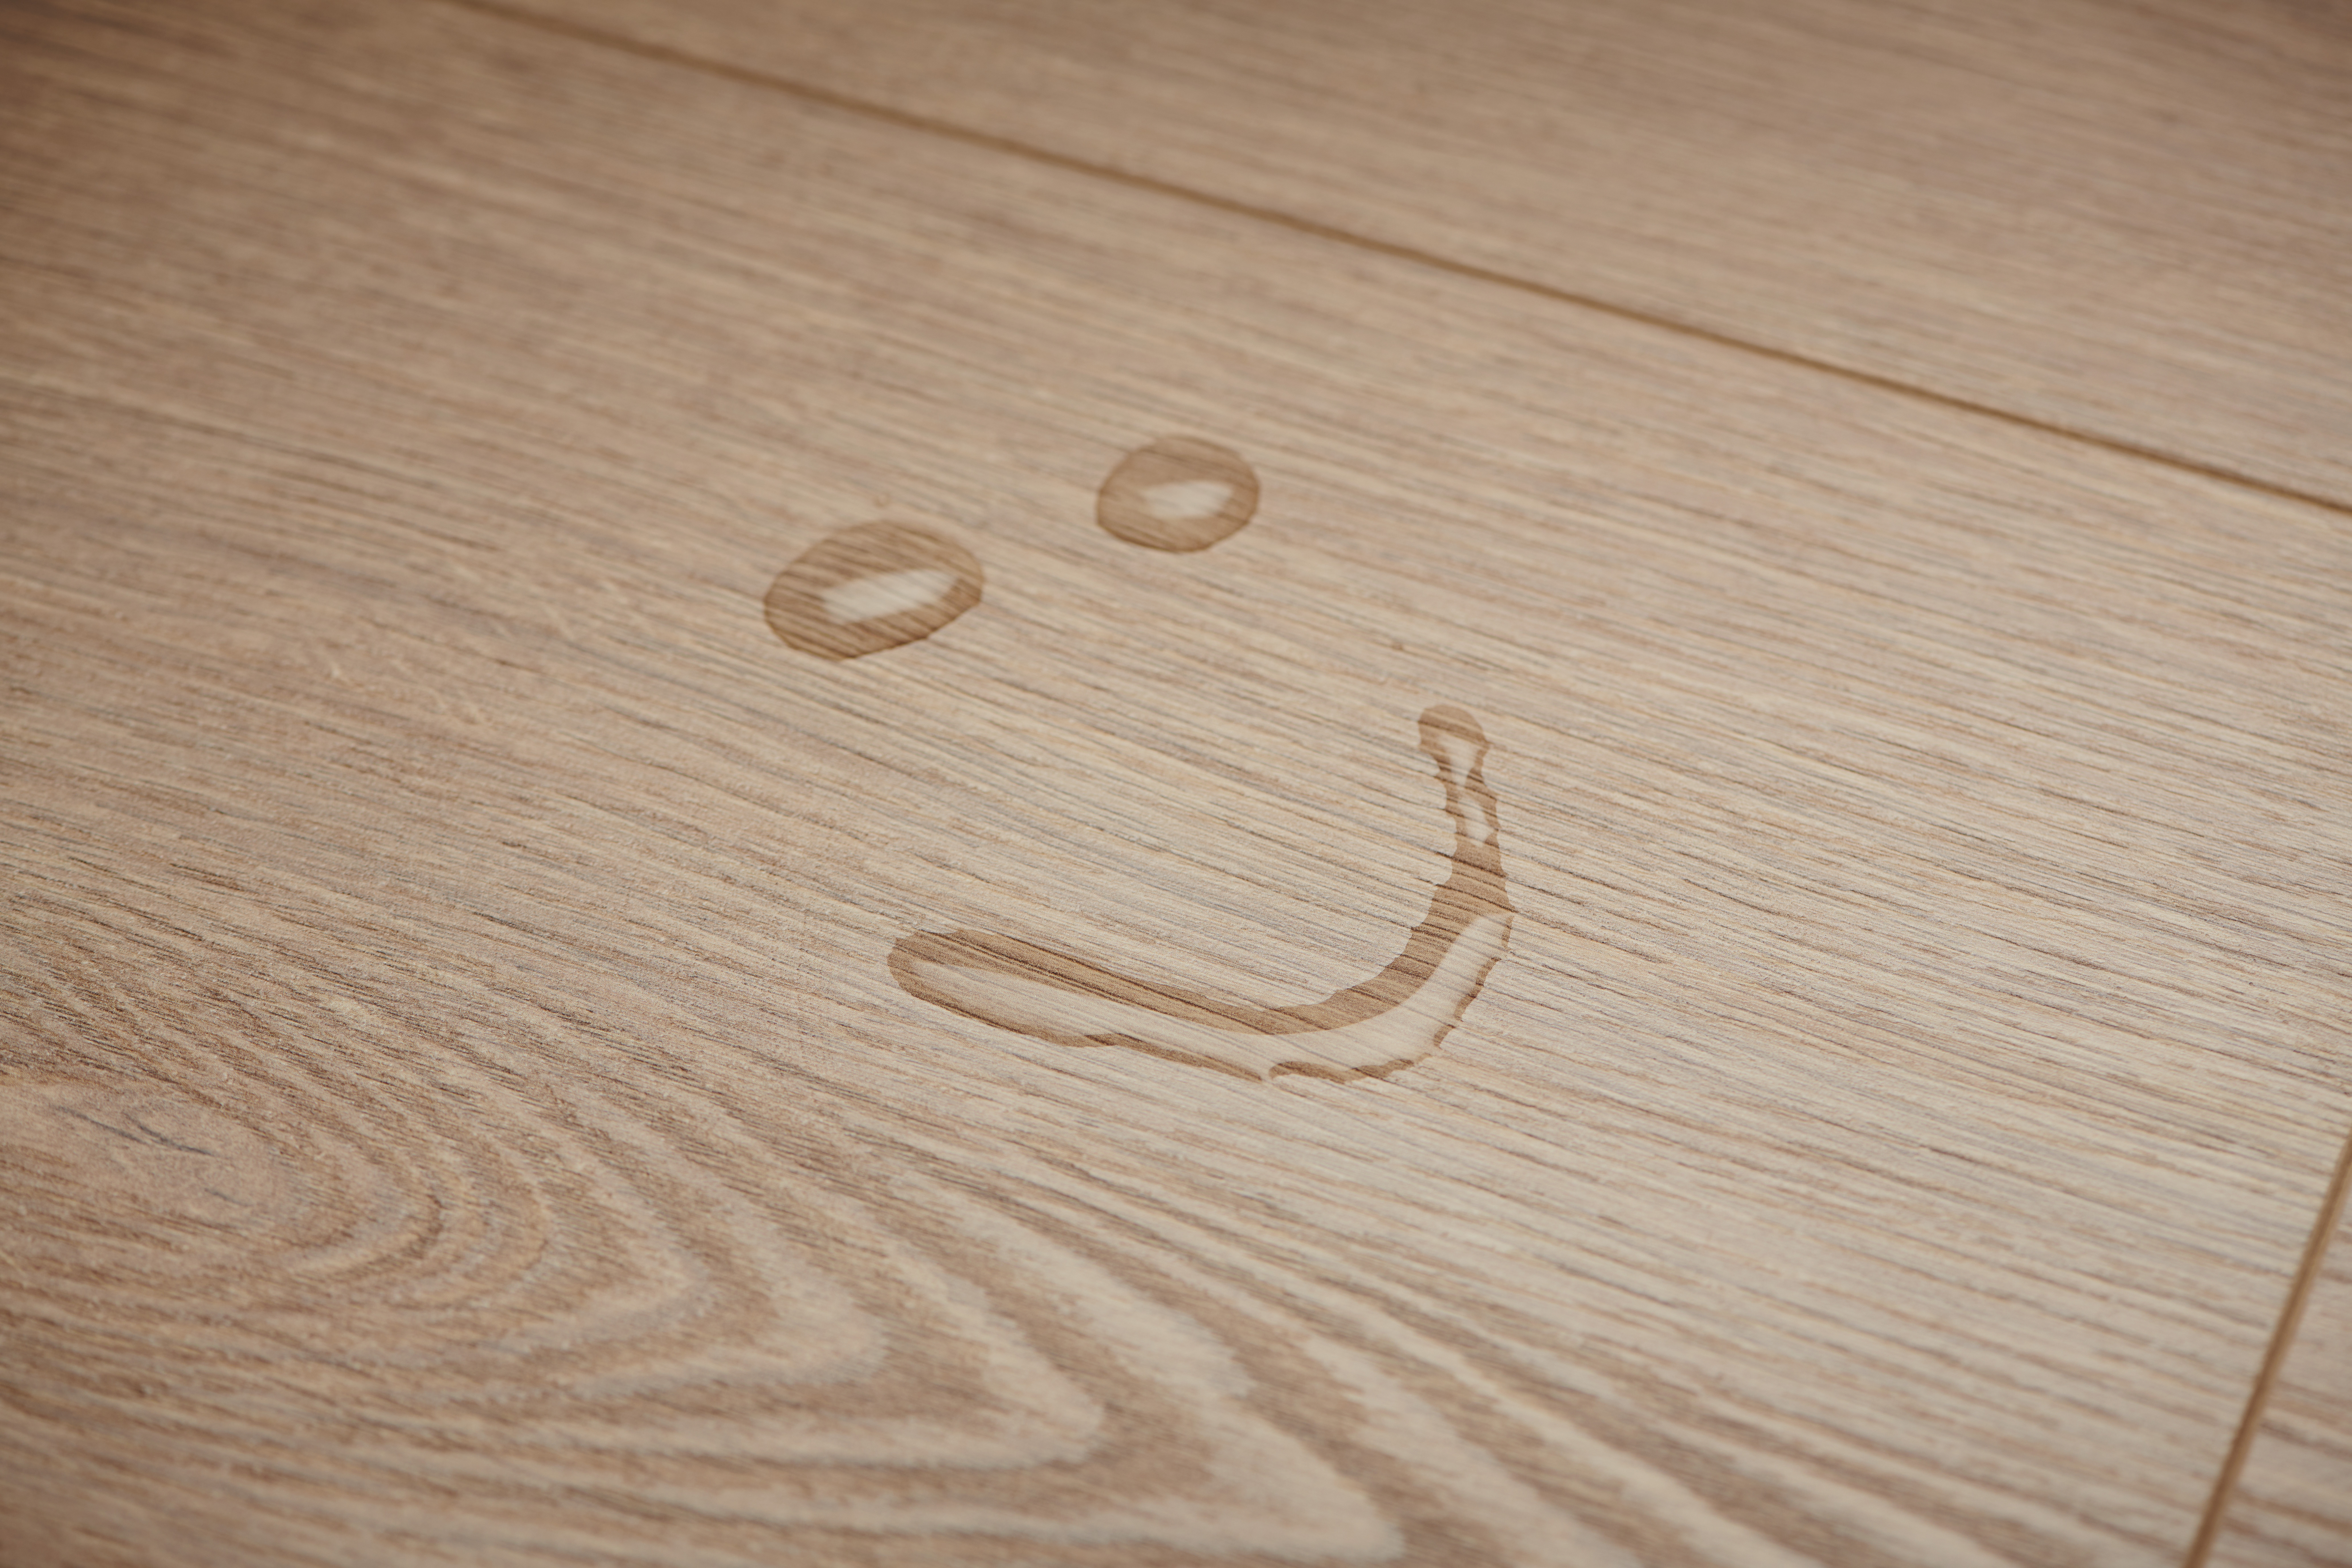 Smiley made of water on EGGER Laminate Flooring with Aqua CLIC it! -  EL1011